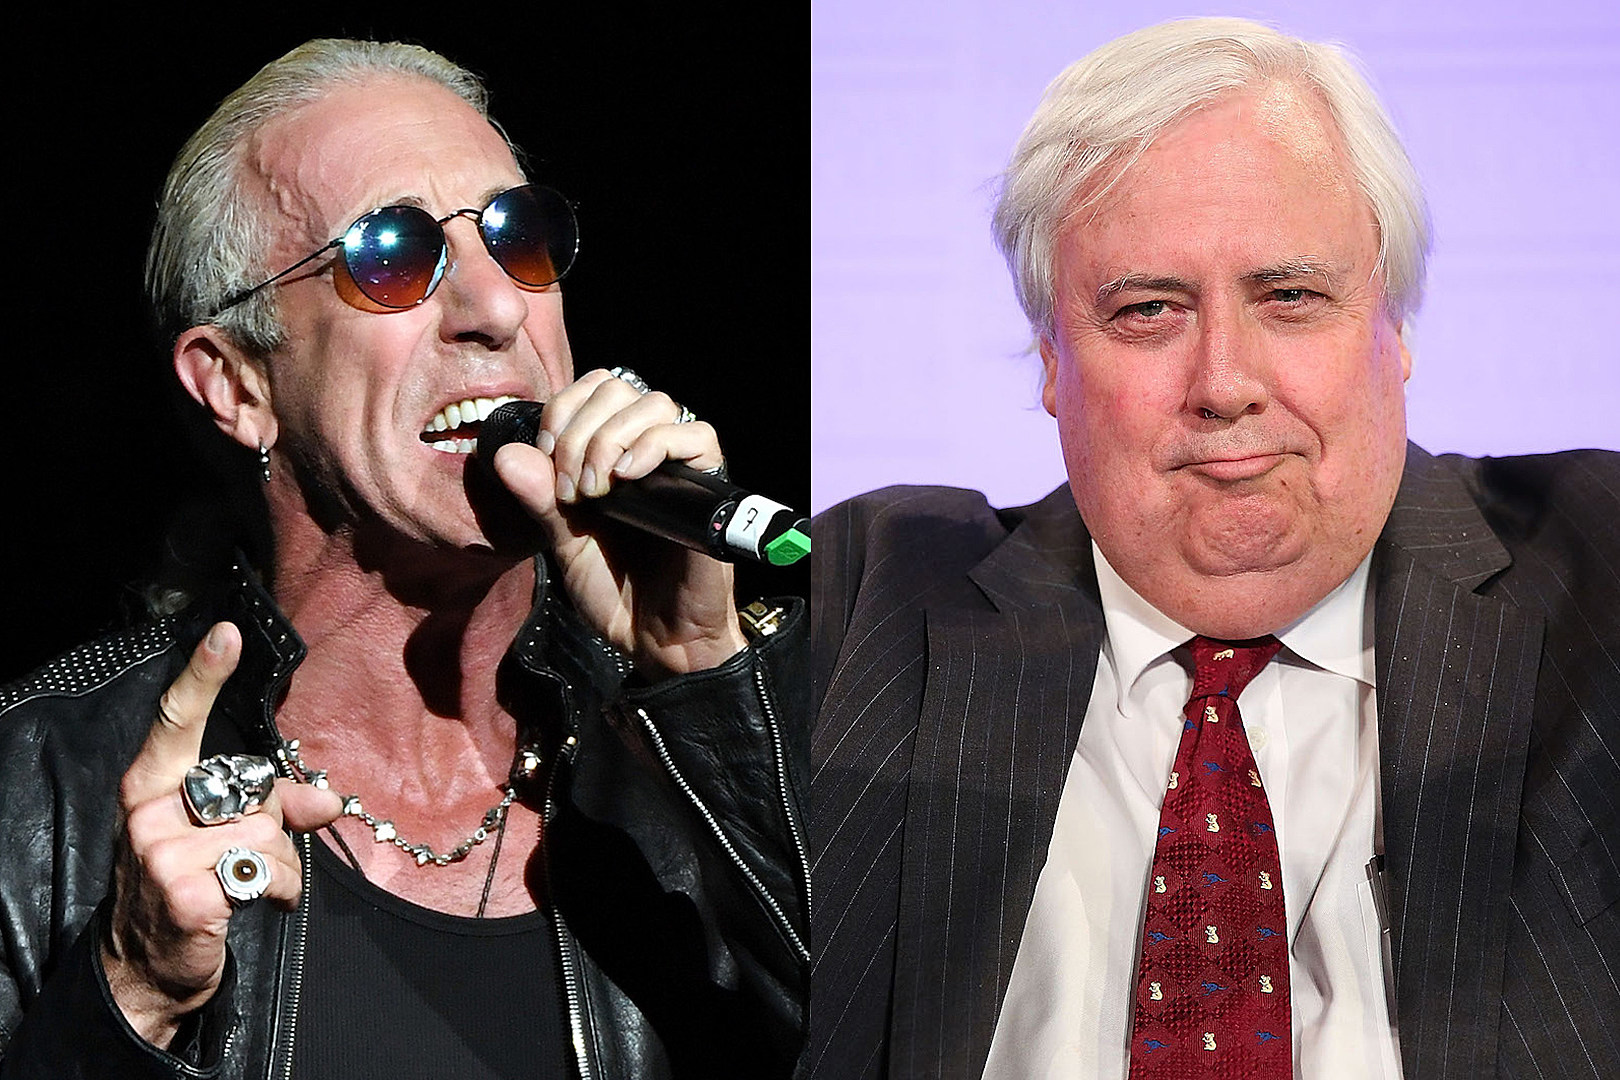 Australian Politician Loses Over $1M in Twisted Sister Lawsuit